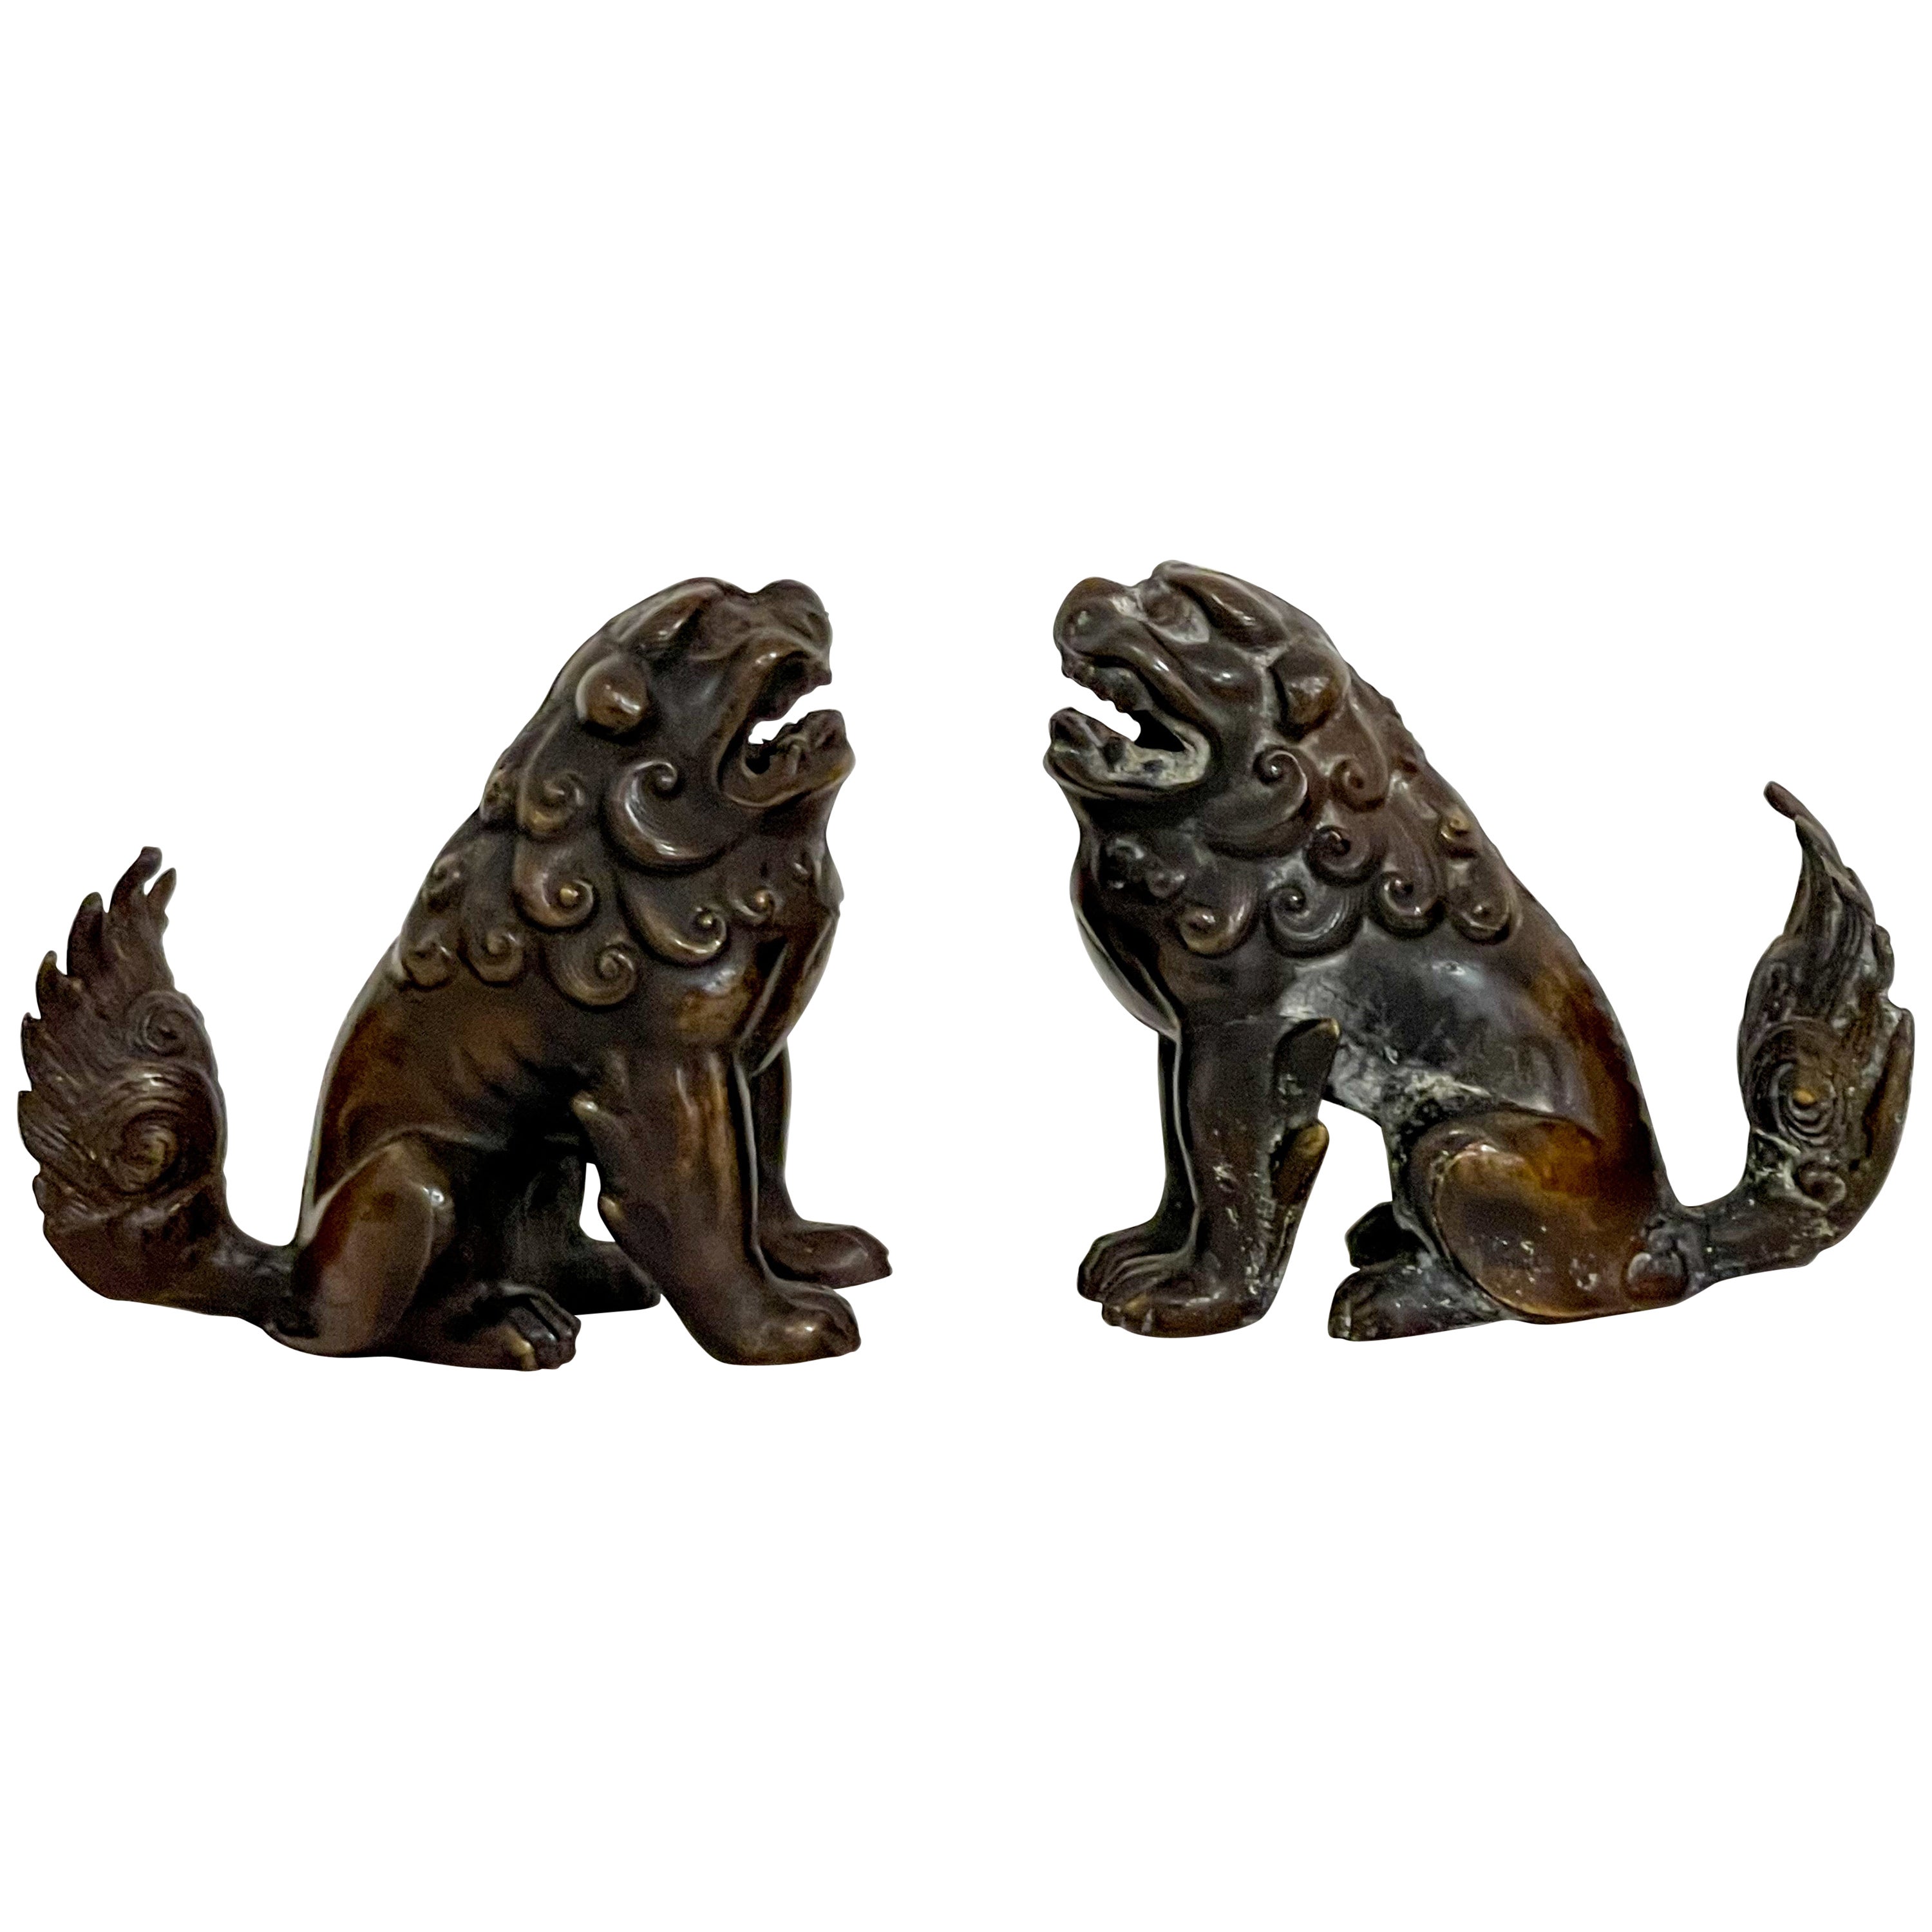 Early 20th-C. Asian Bronze Food Dogs or Lions Figurines, Pair For Sale